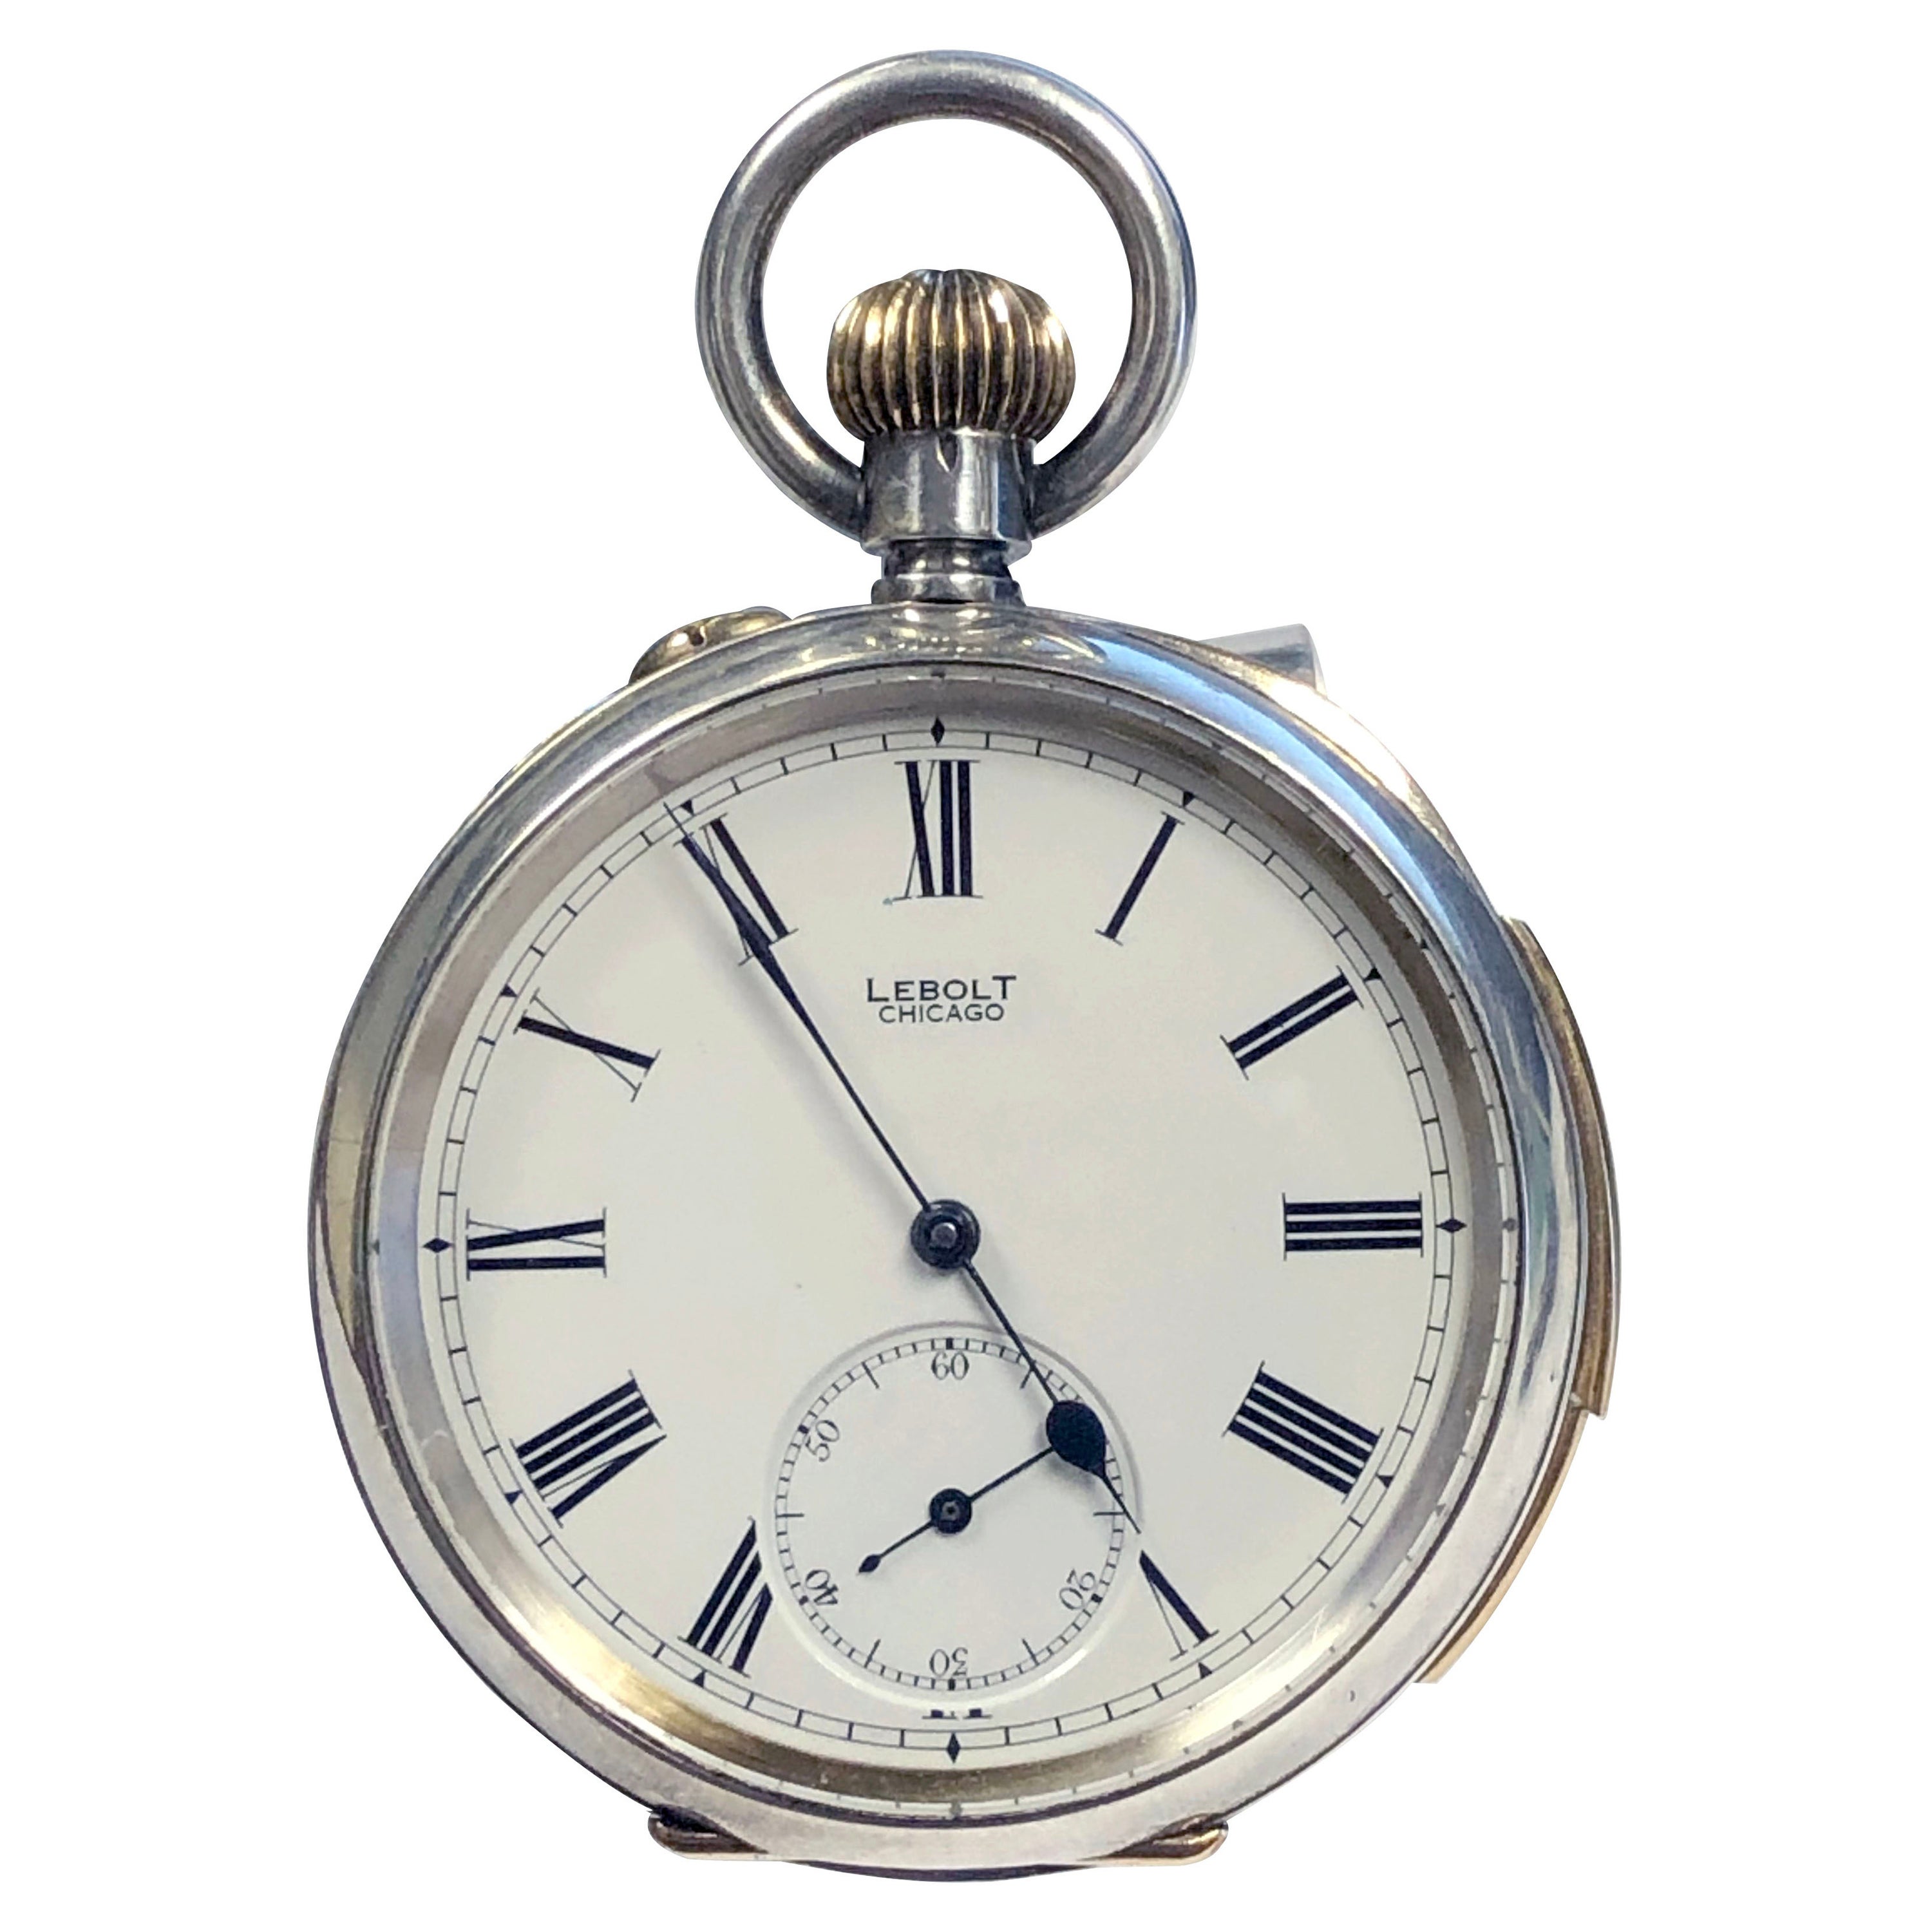 Antique Silver Cased Minute Repeater Pocket Watch Retailed by Lebolt & Company